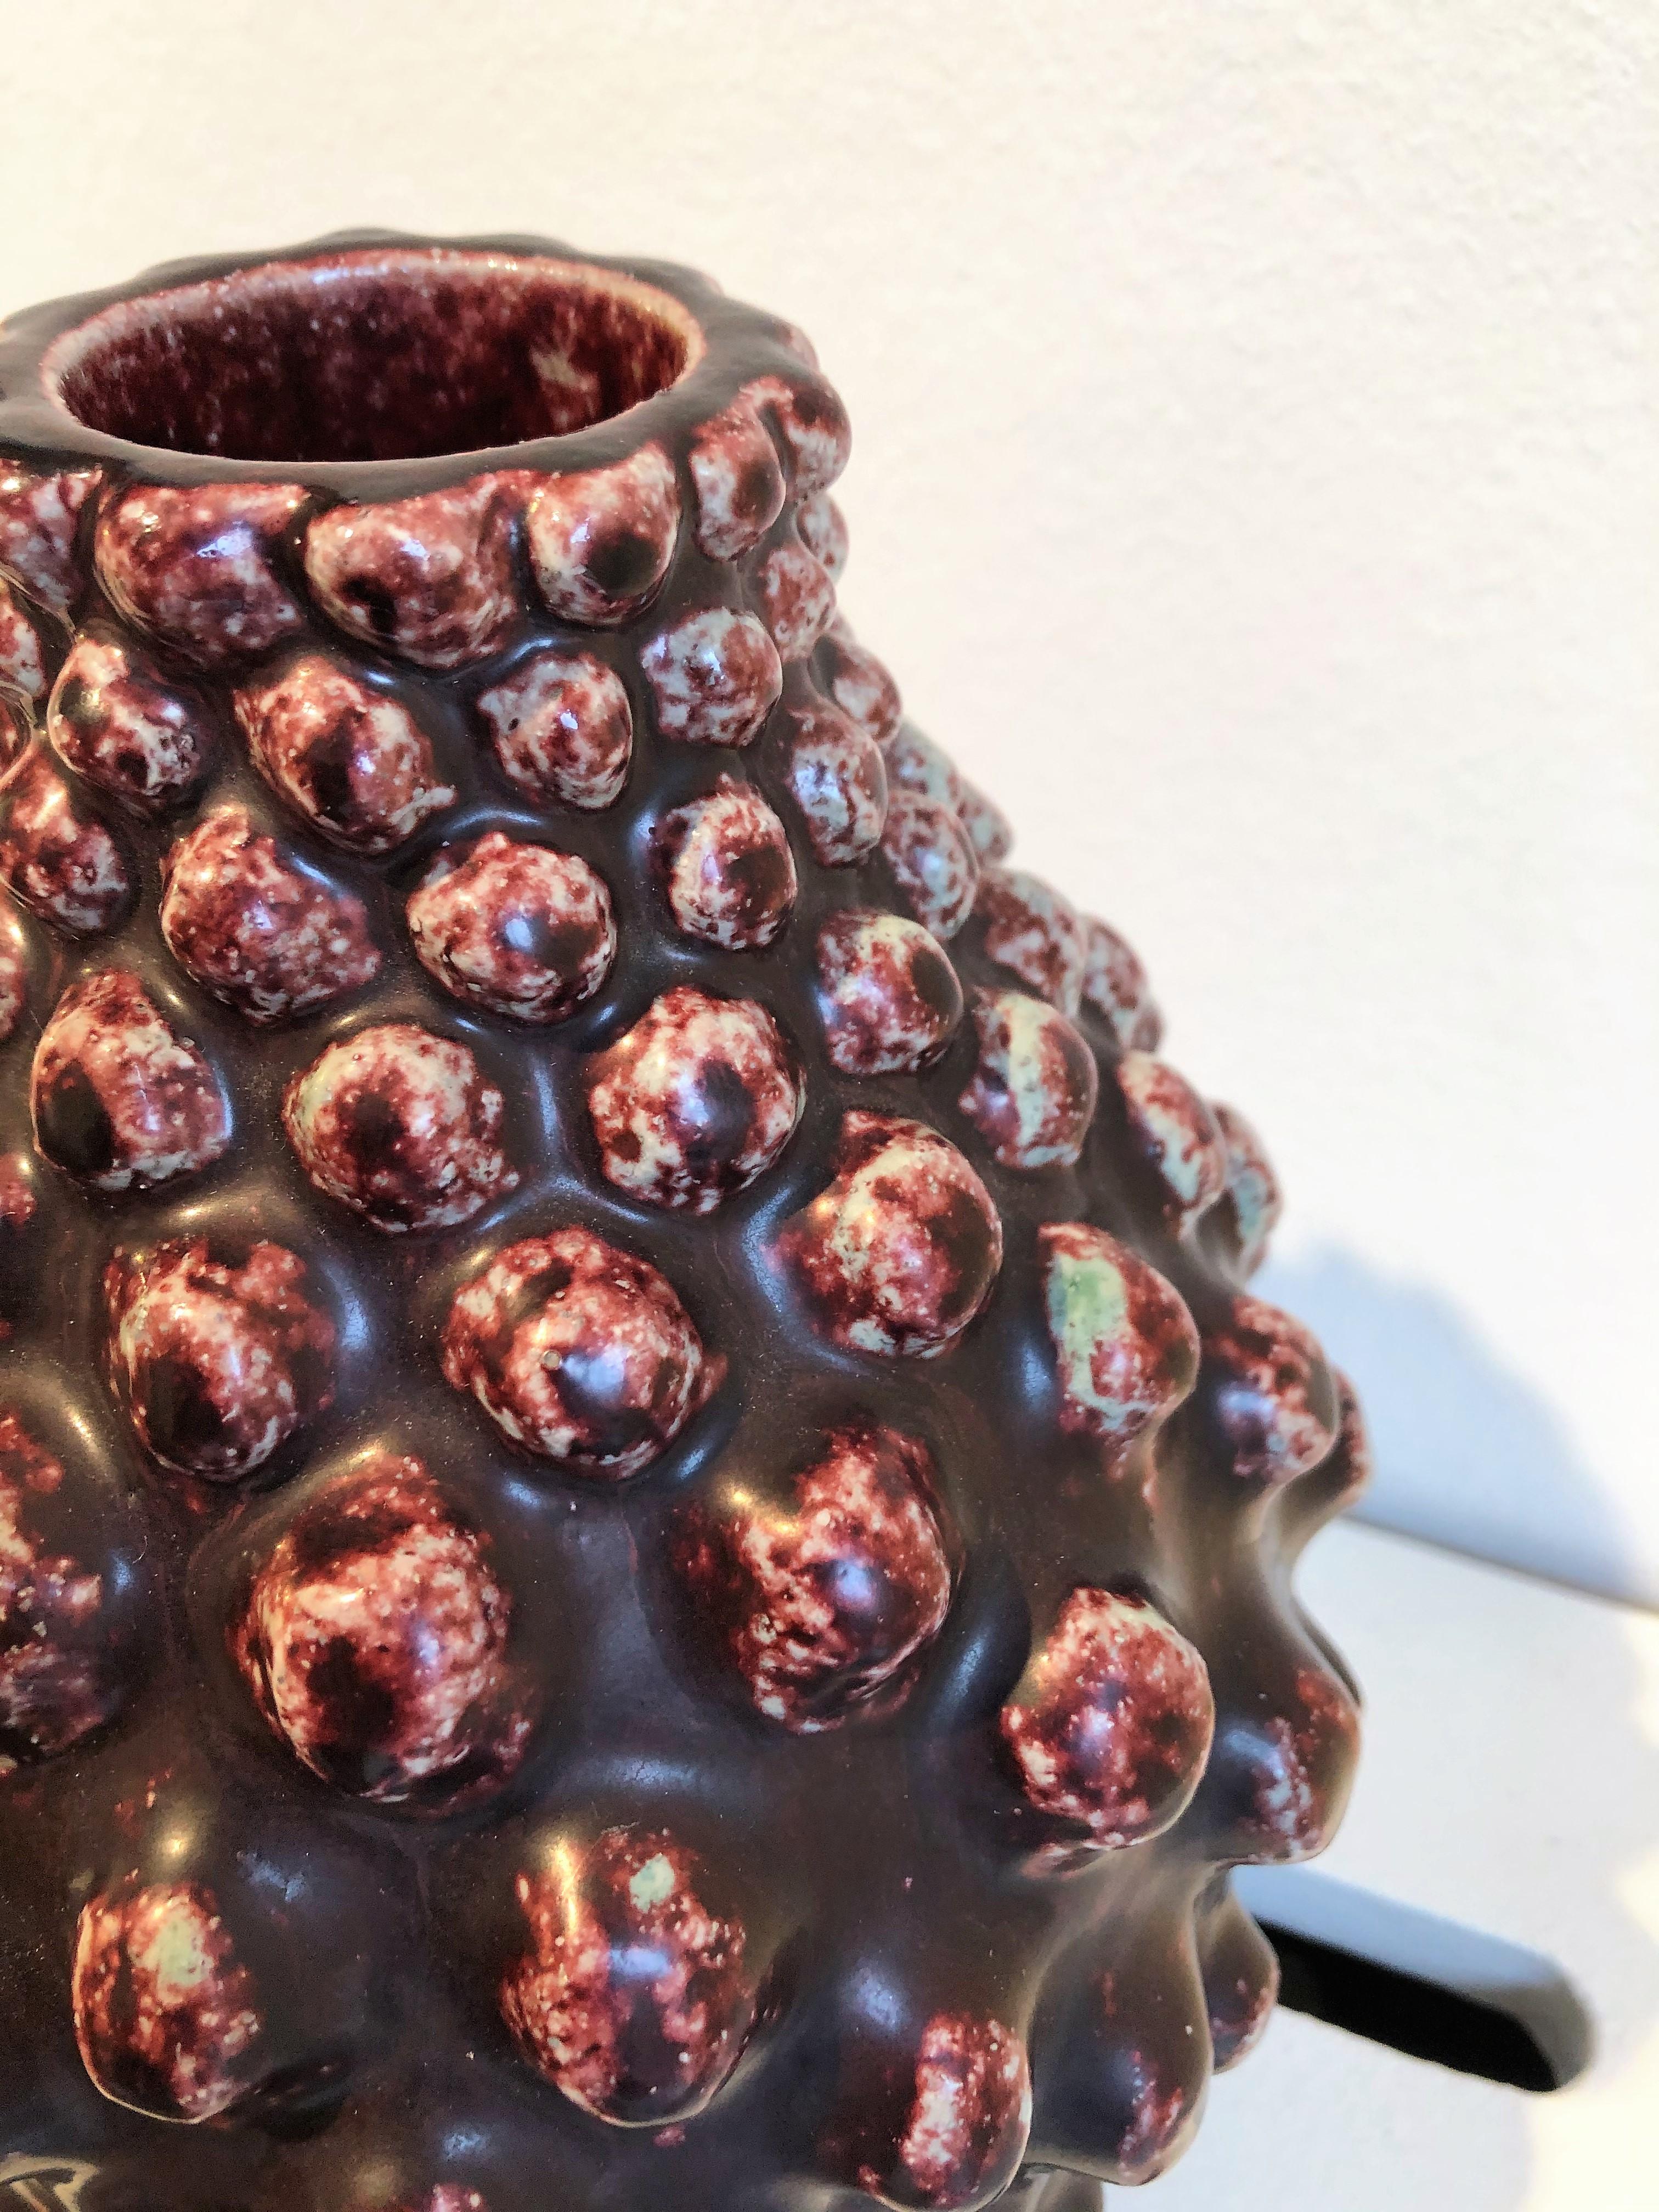 Mid-20th Century Axel Salto Vase in 'Budding' Style and Oxblood Glaze for Royal Copenhagen, 1961